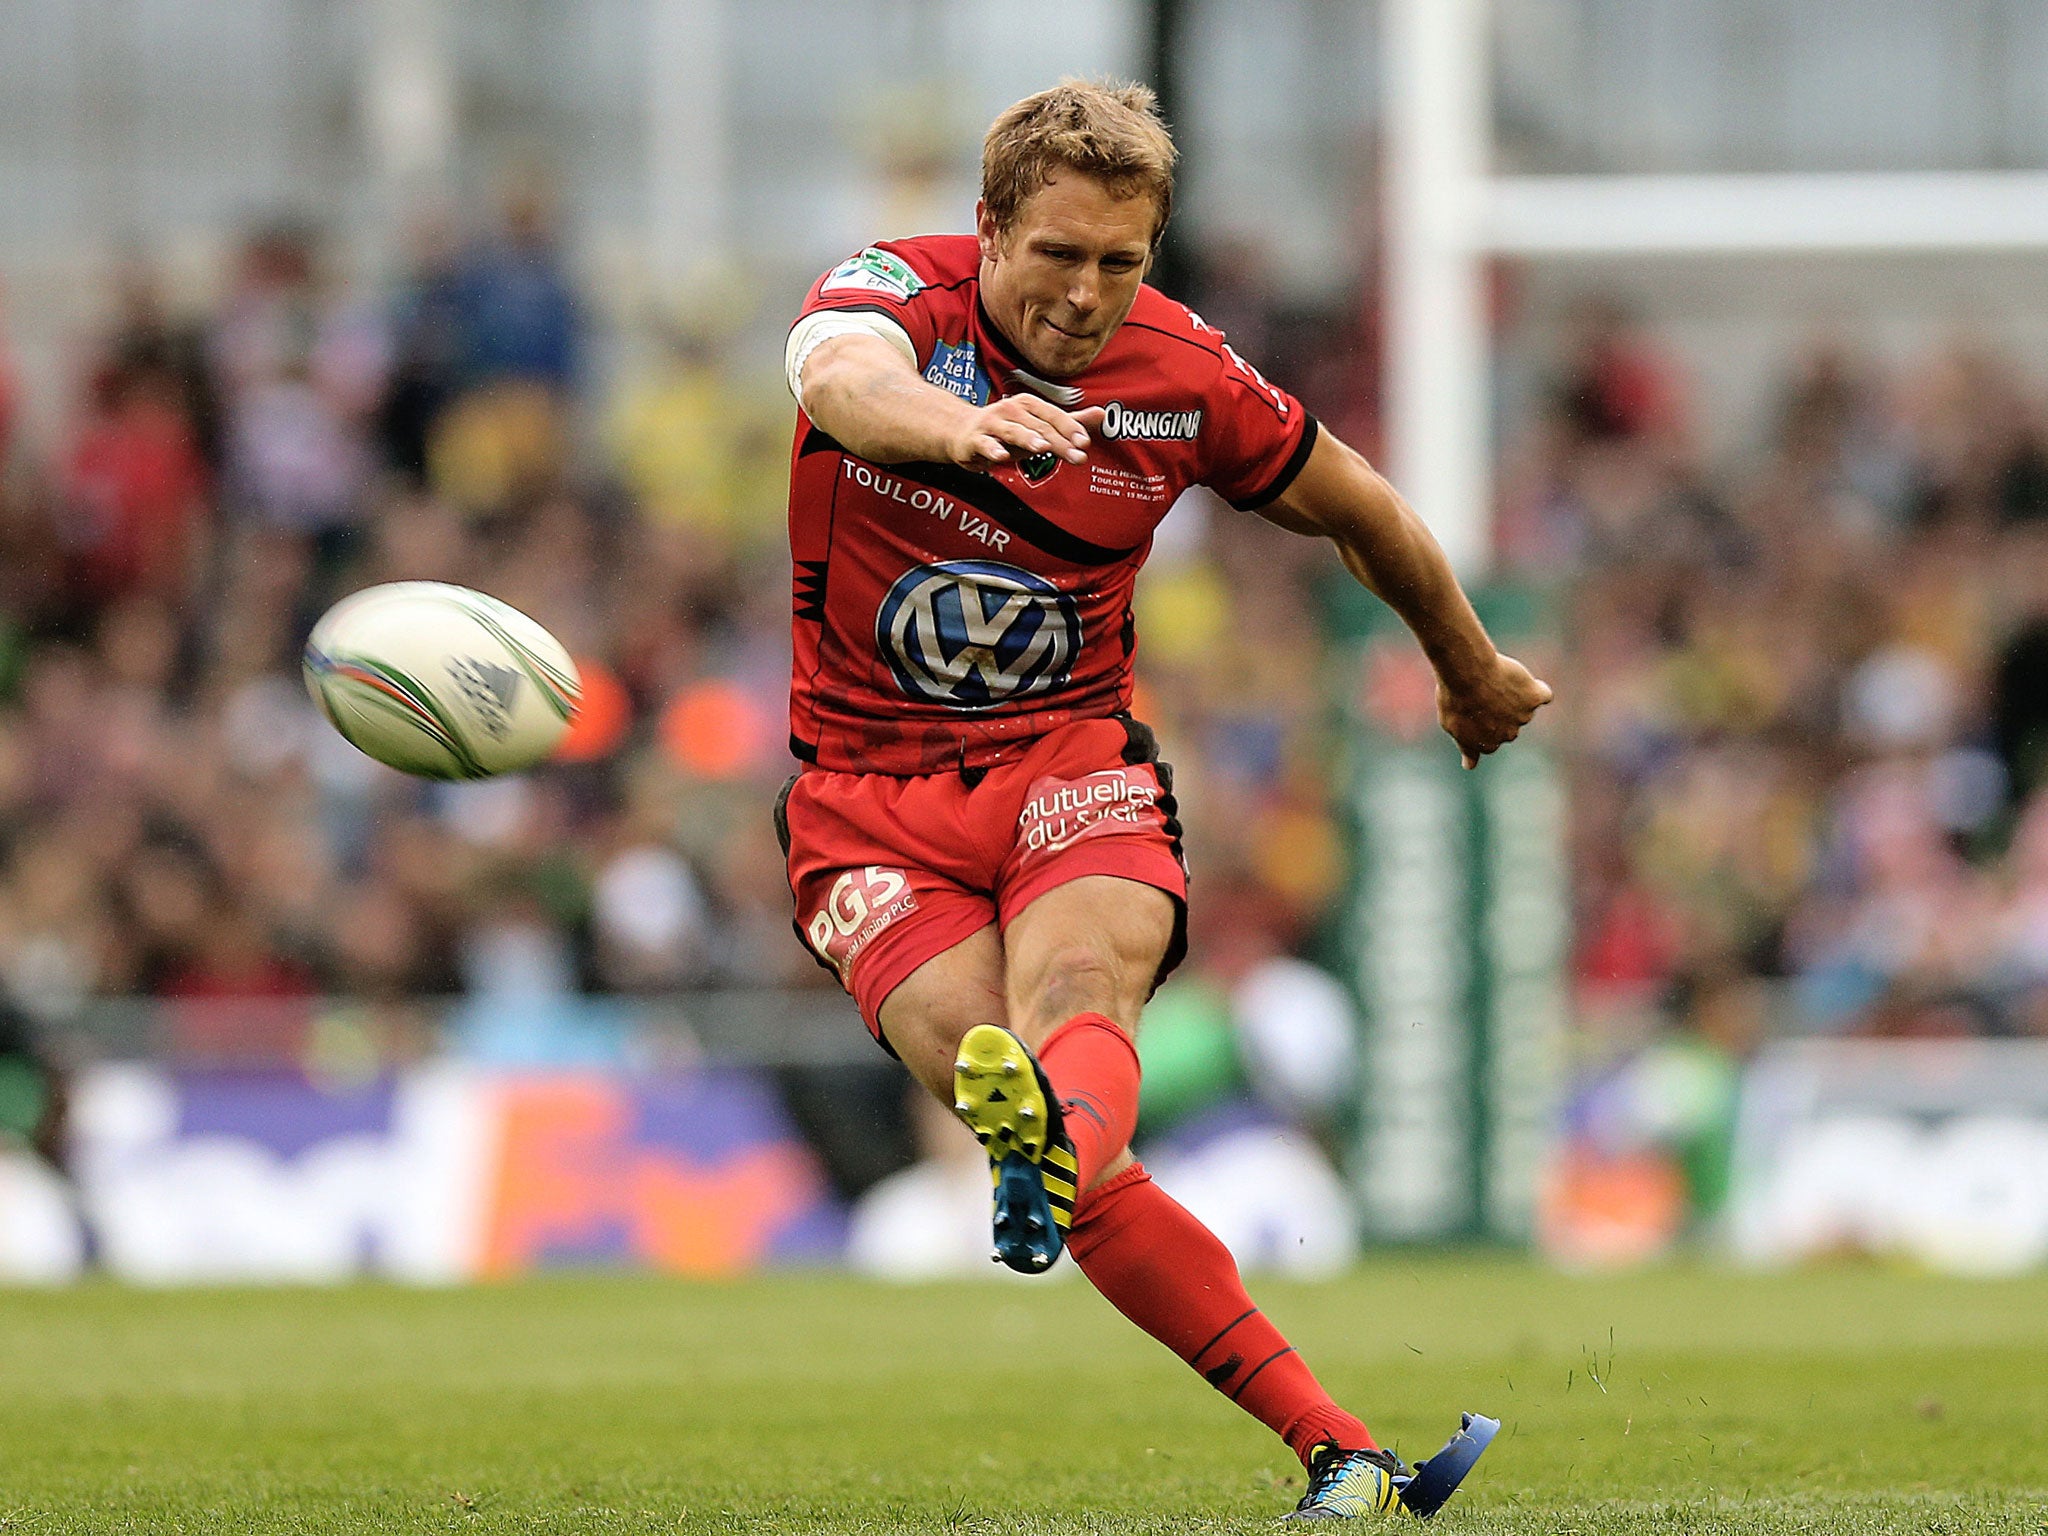 Jonny Wilkinson is ‘injury only’ for the Lions